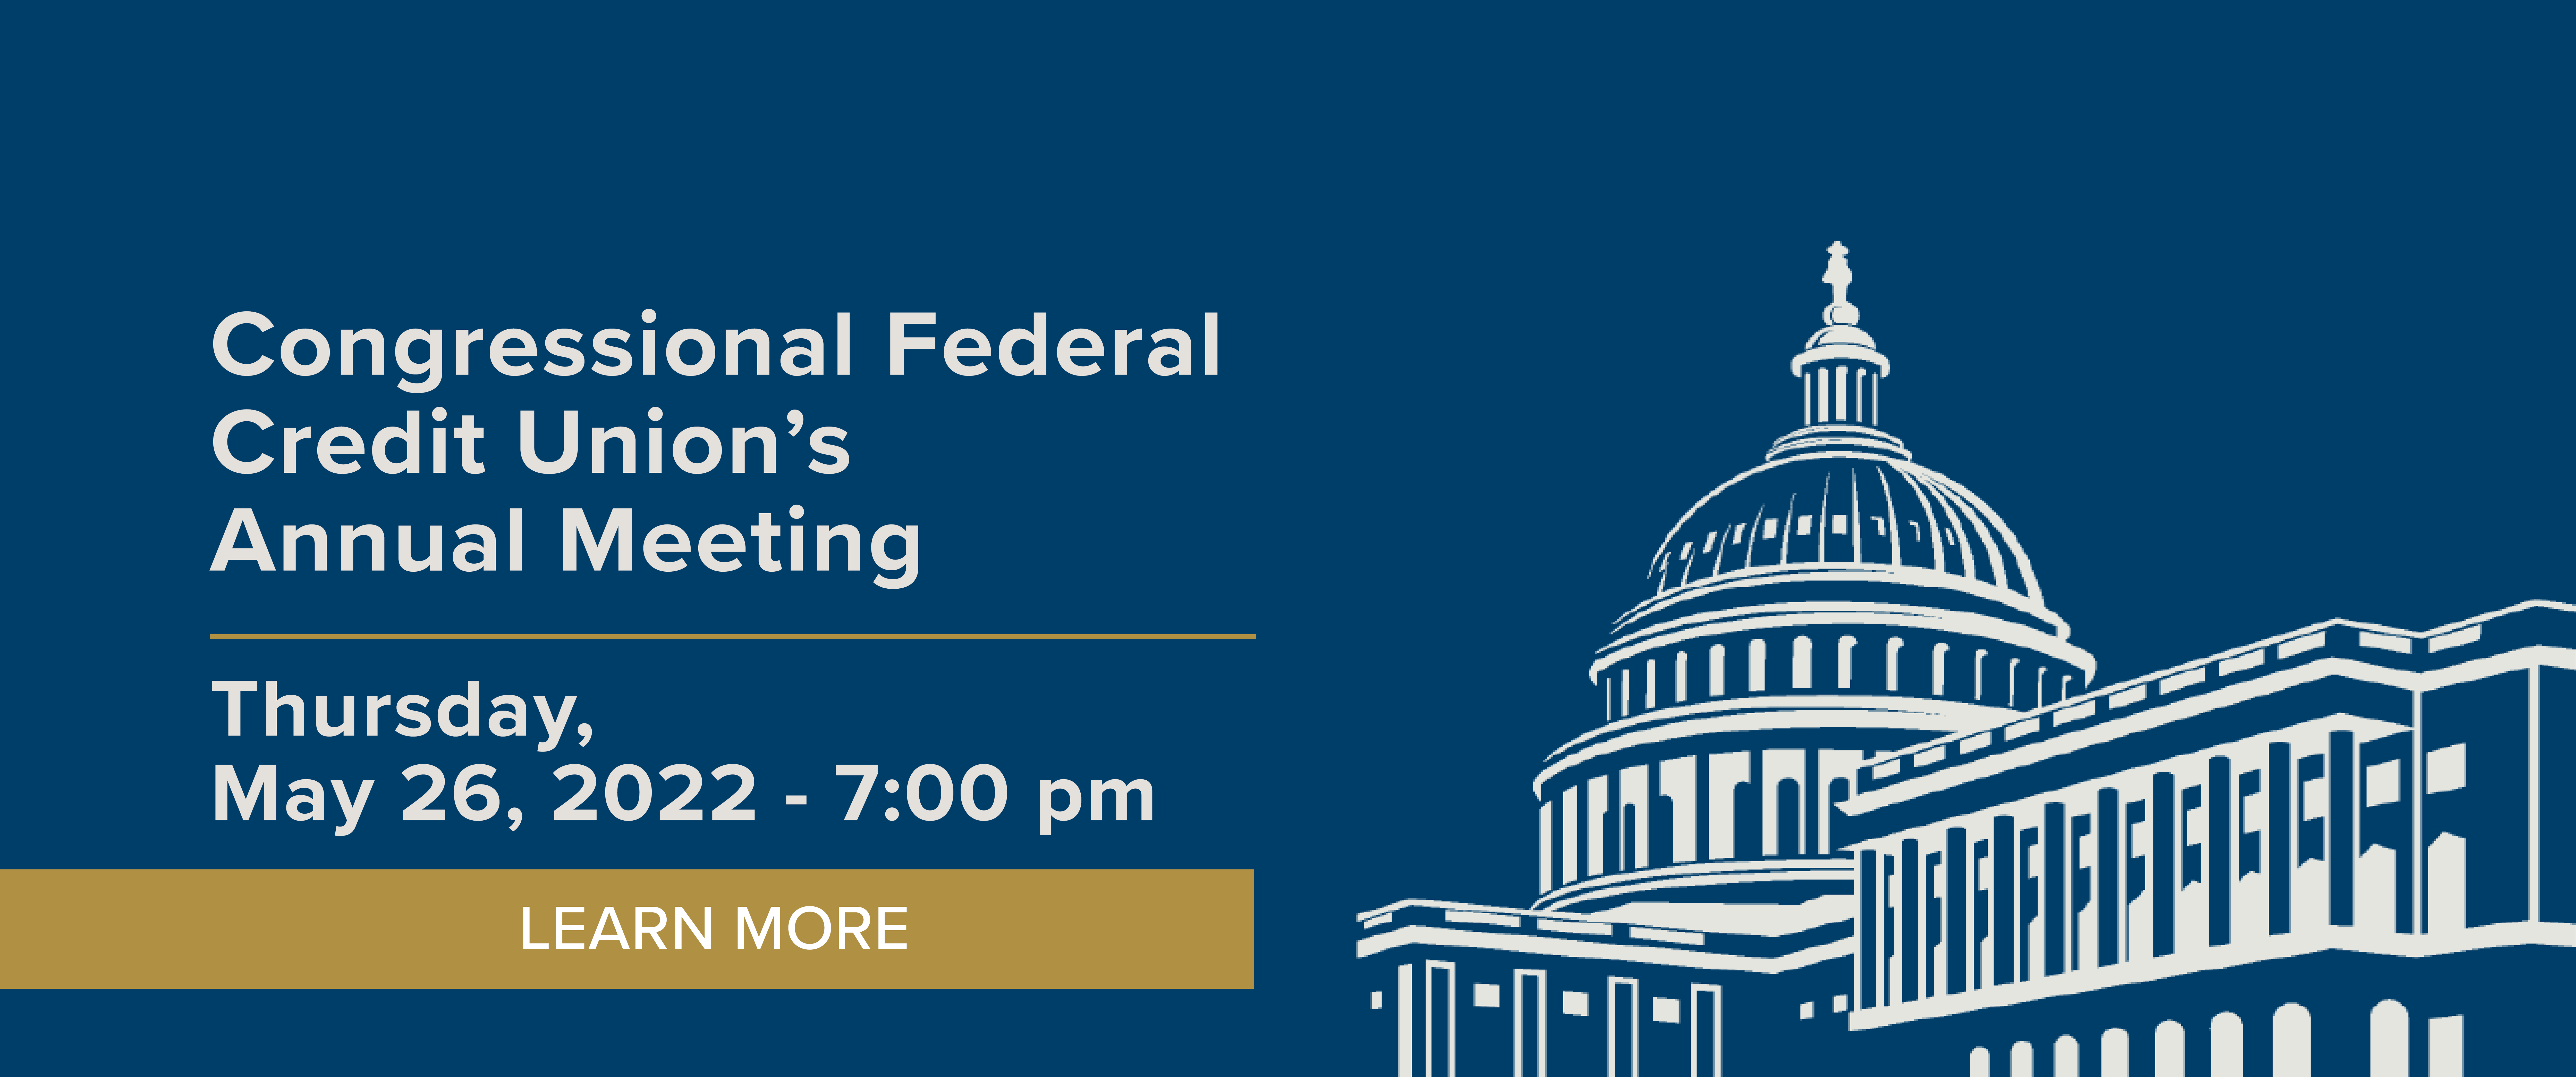 Congressional Federal  Credit UnionÃ¢â‚¬â„¢s Annual Meeting Thursday,  May 26, 2022 - 7:00 pm Learn More